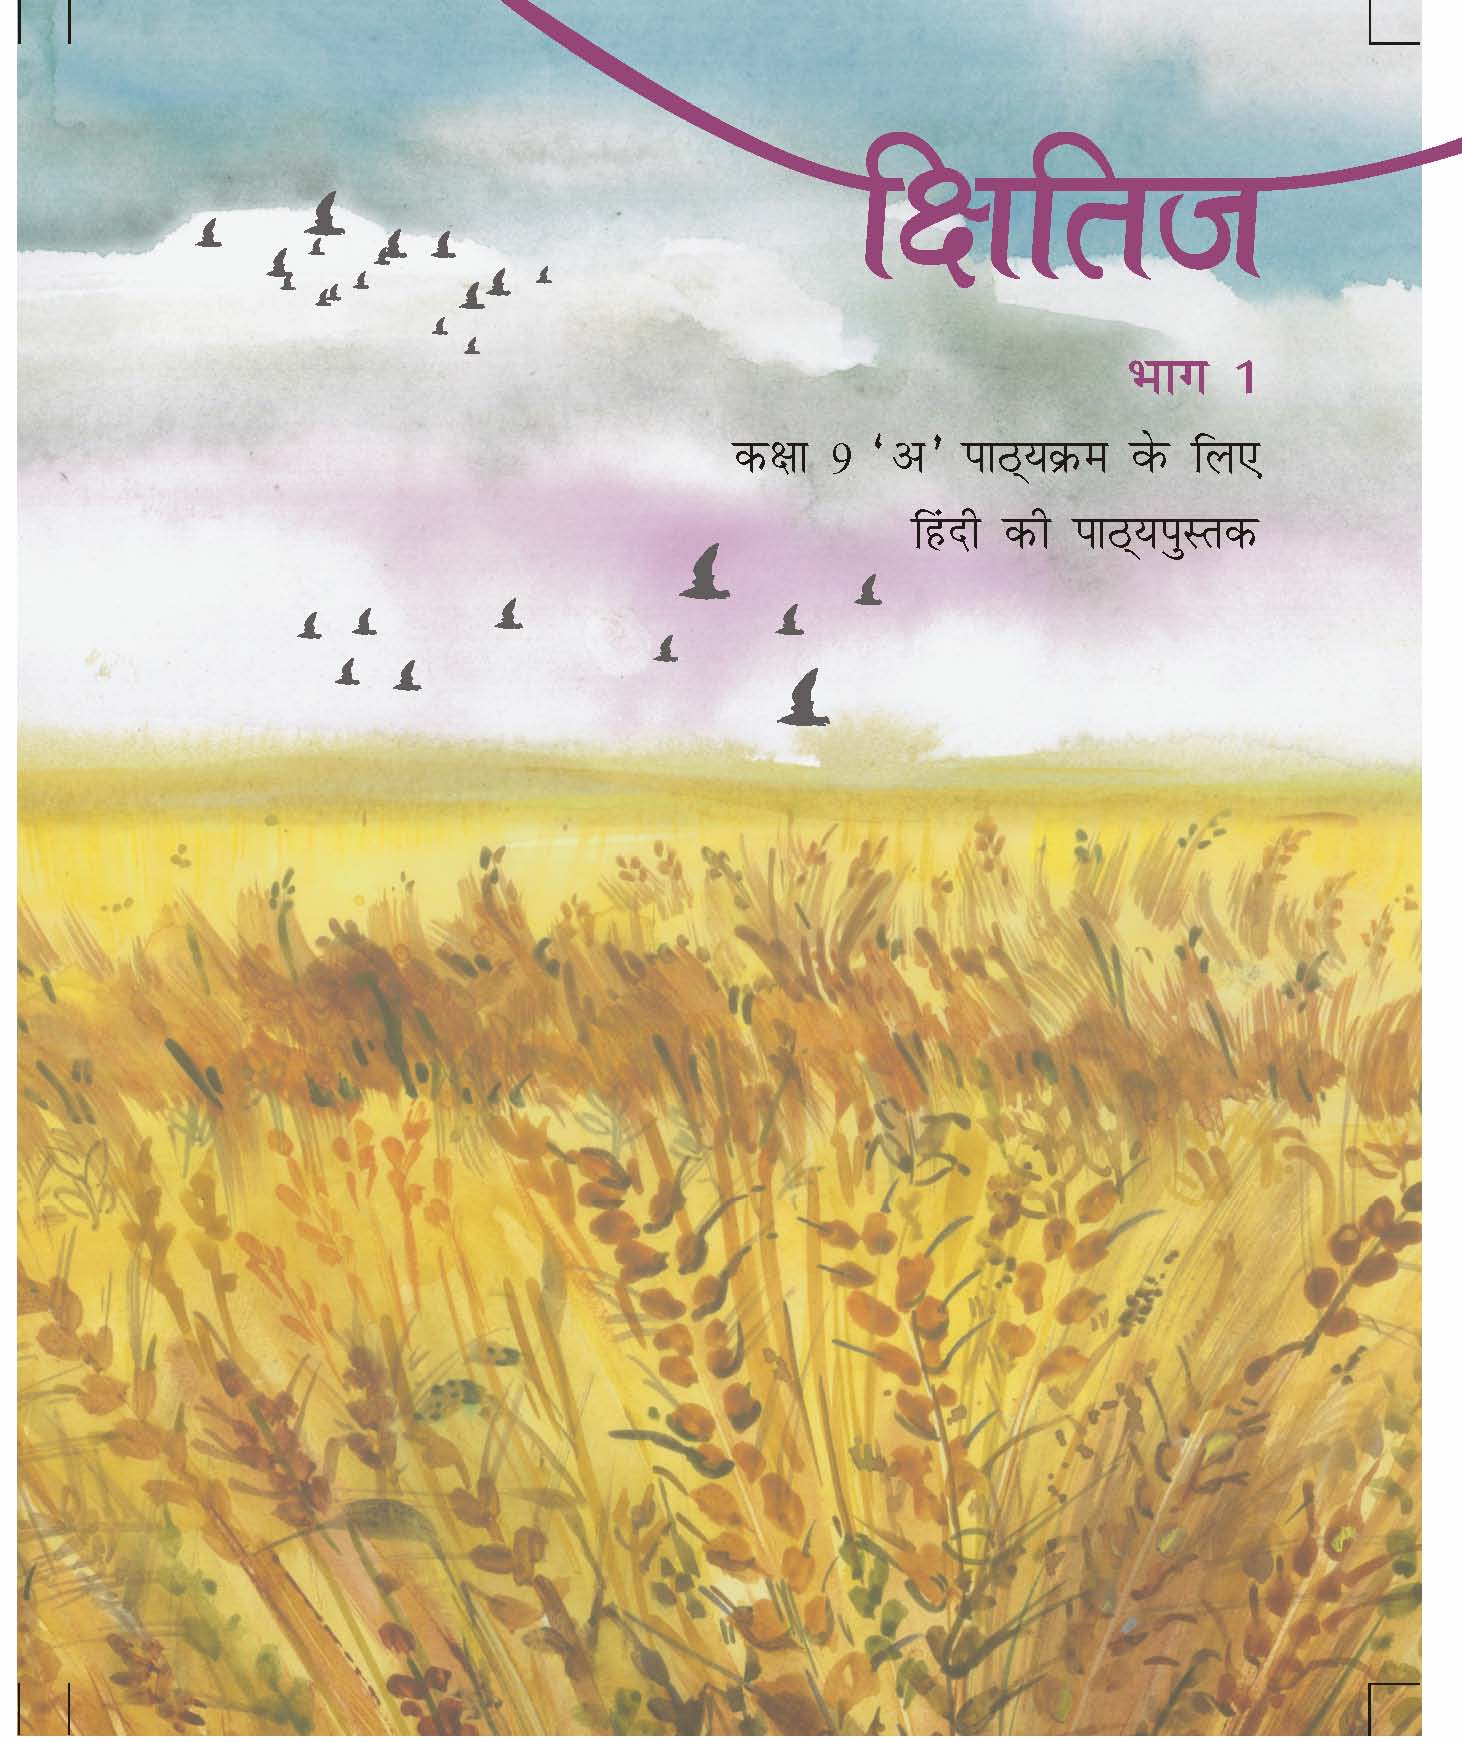 NCERT Solutions for Class 9 Hindi Course A Kshitij Premchand